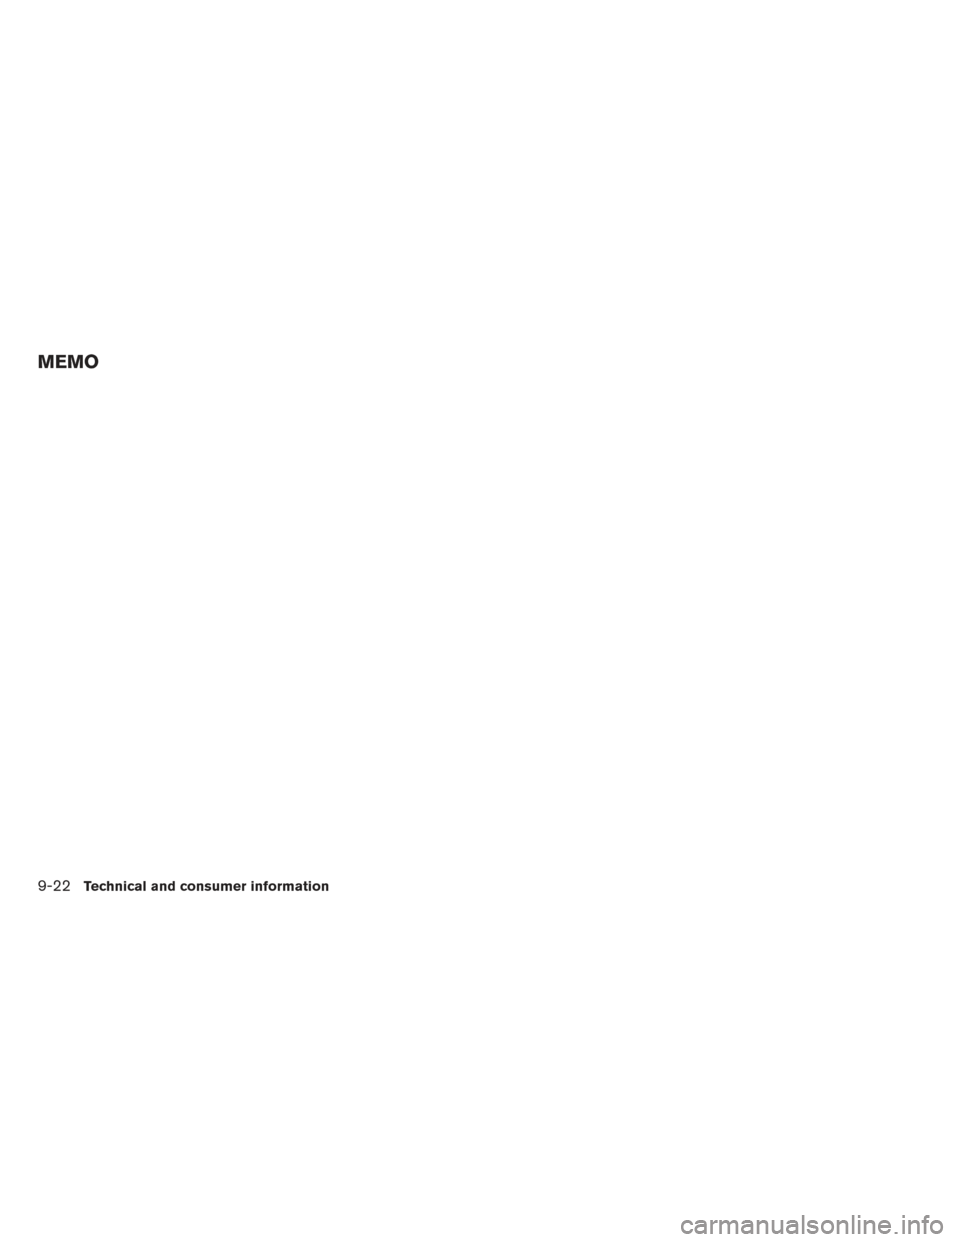 NISSAN ALTIMA 2014 L33 / 5.G Owners Manual MEMO
9-22Technical and consumer information 